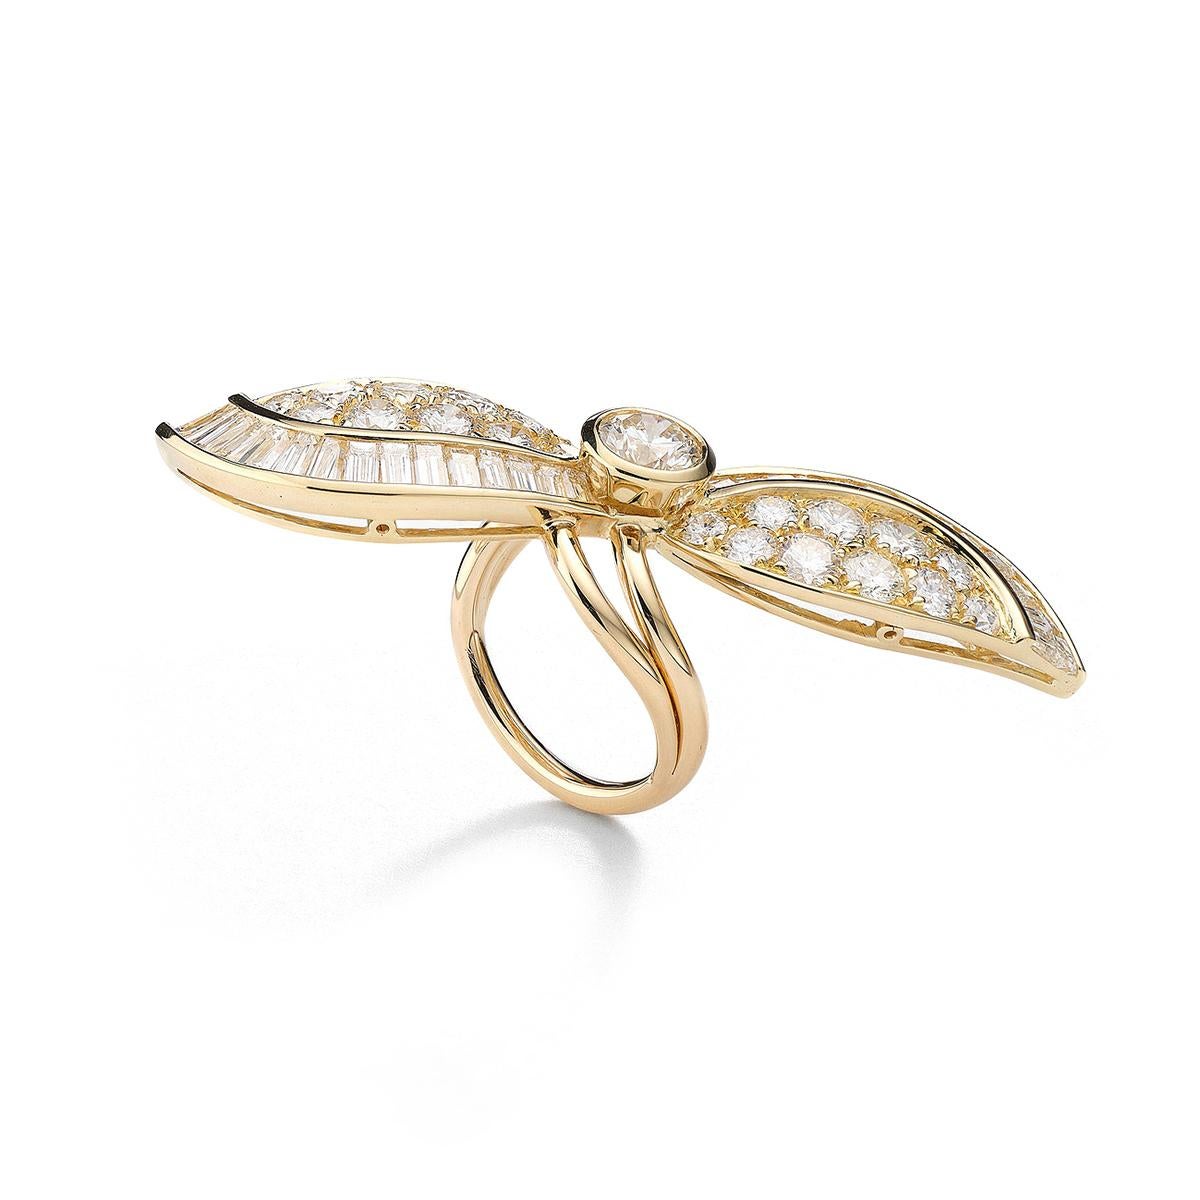 Ring in 18kt yellow gold set with one diamond 1.14 cts, 20 diamonds 3.16 cts and 30 tapers cut diamonds 3.30 cts Size 53